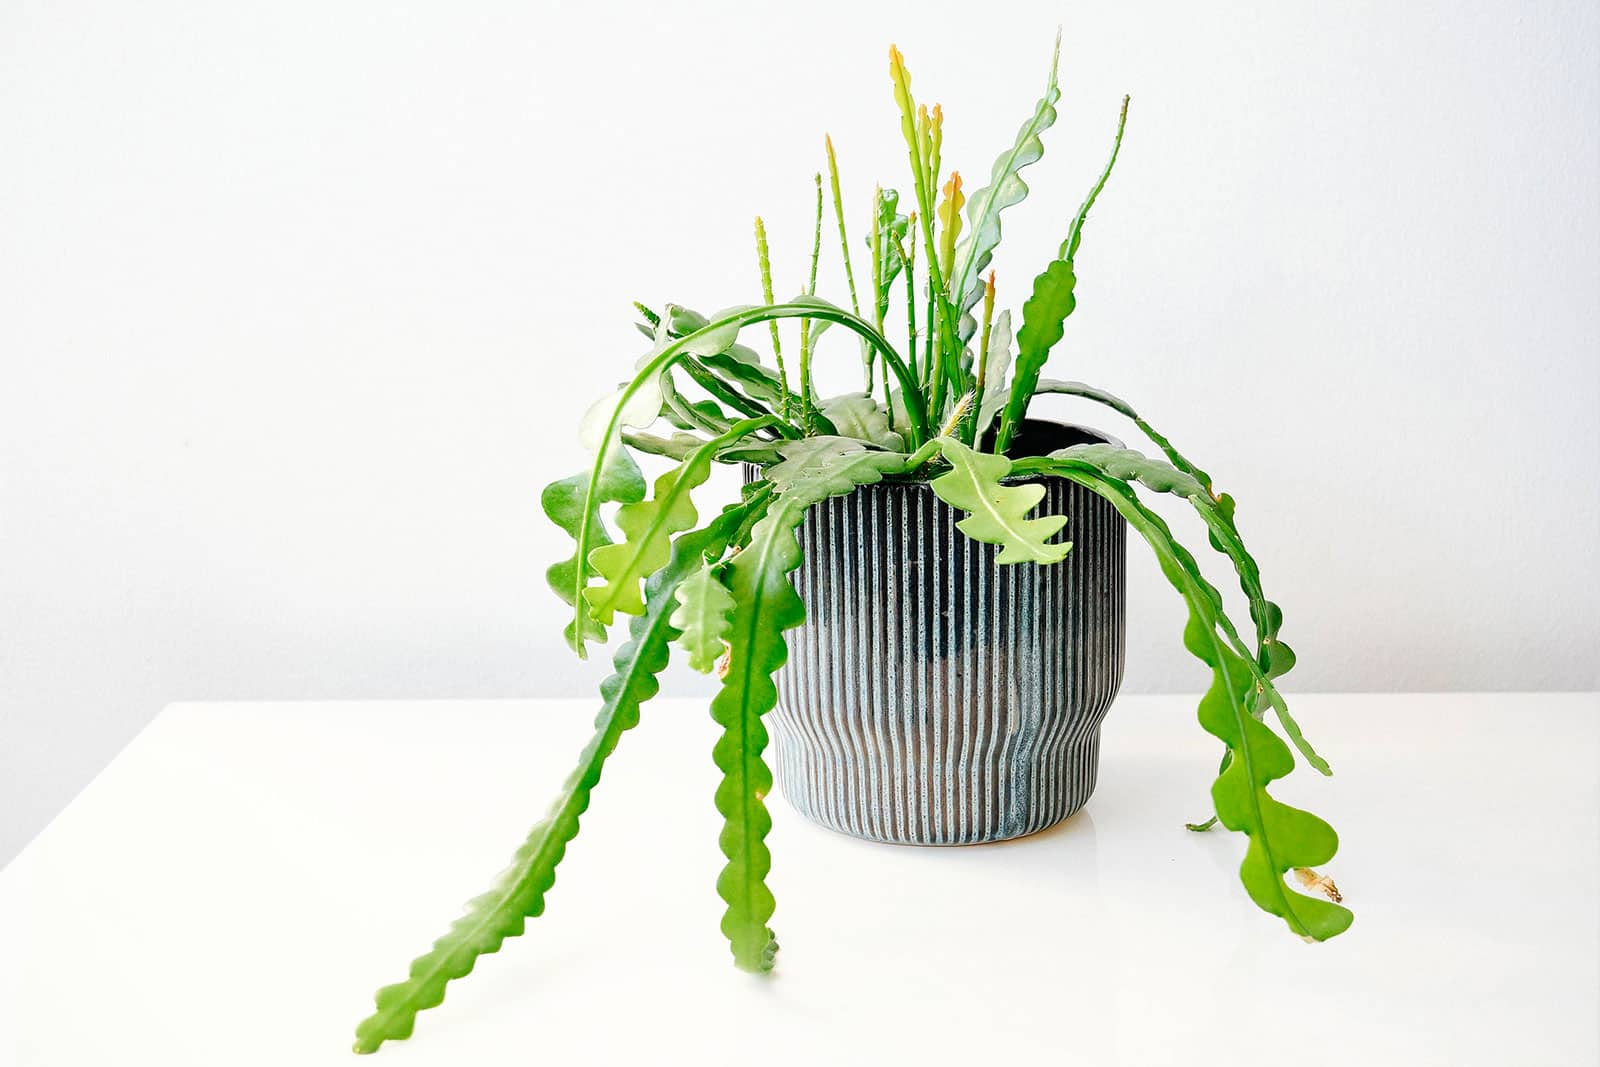 Fishbone cactus (Disocactus anguliger) plant in a striped black ceramic pot on a white table against a white wall